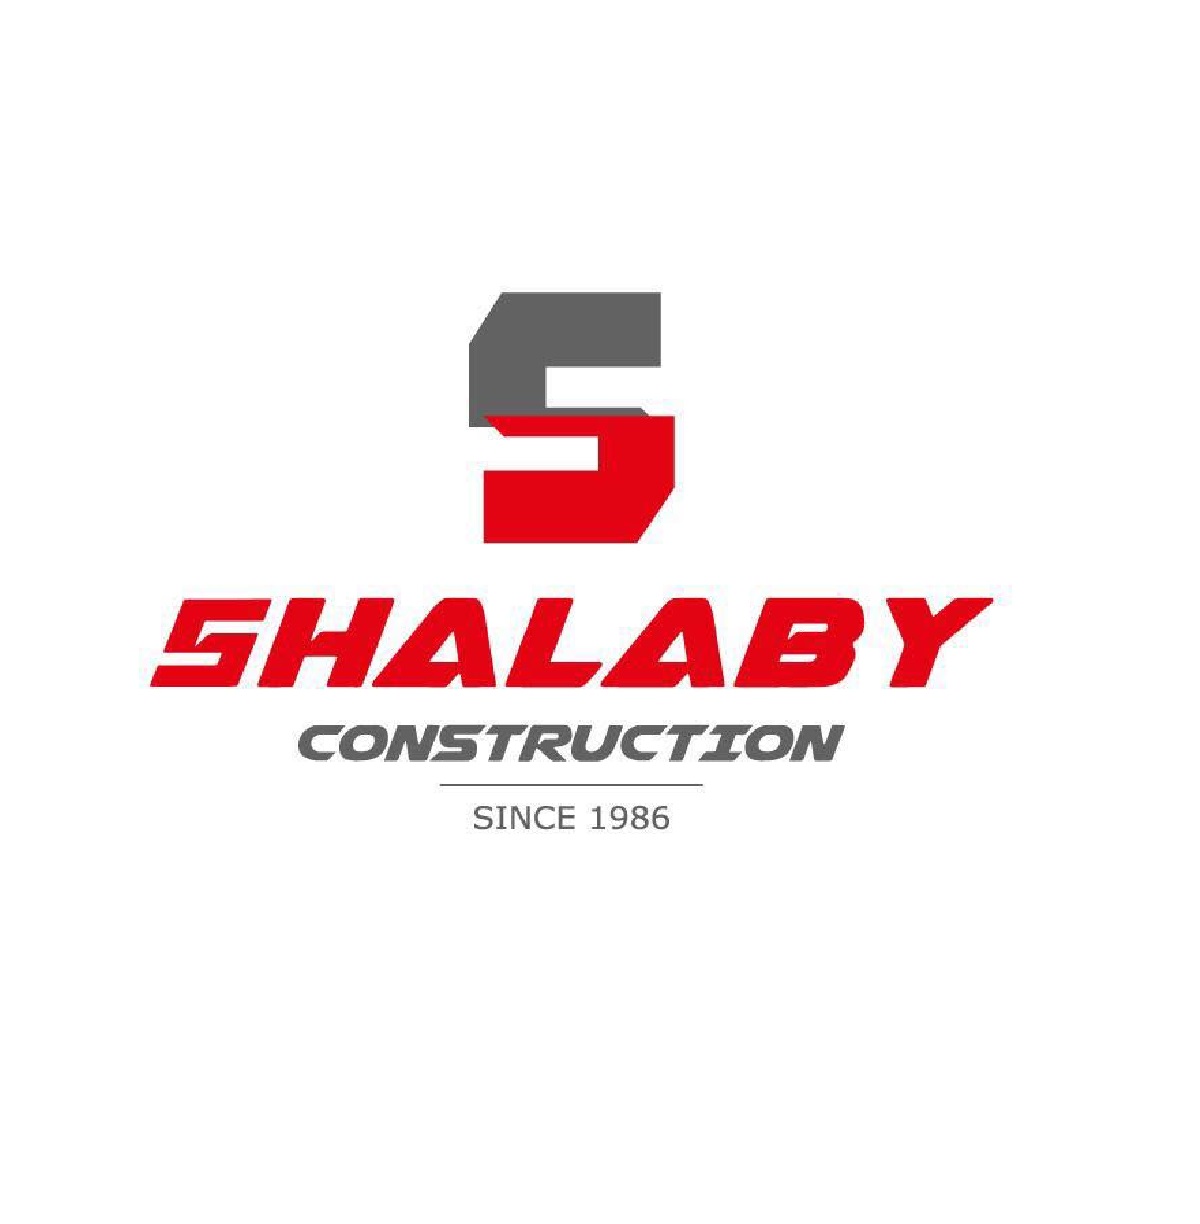 Shalaby construction